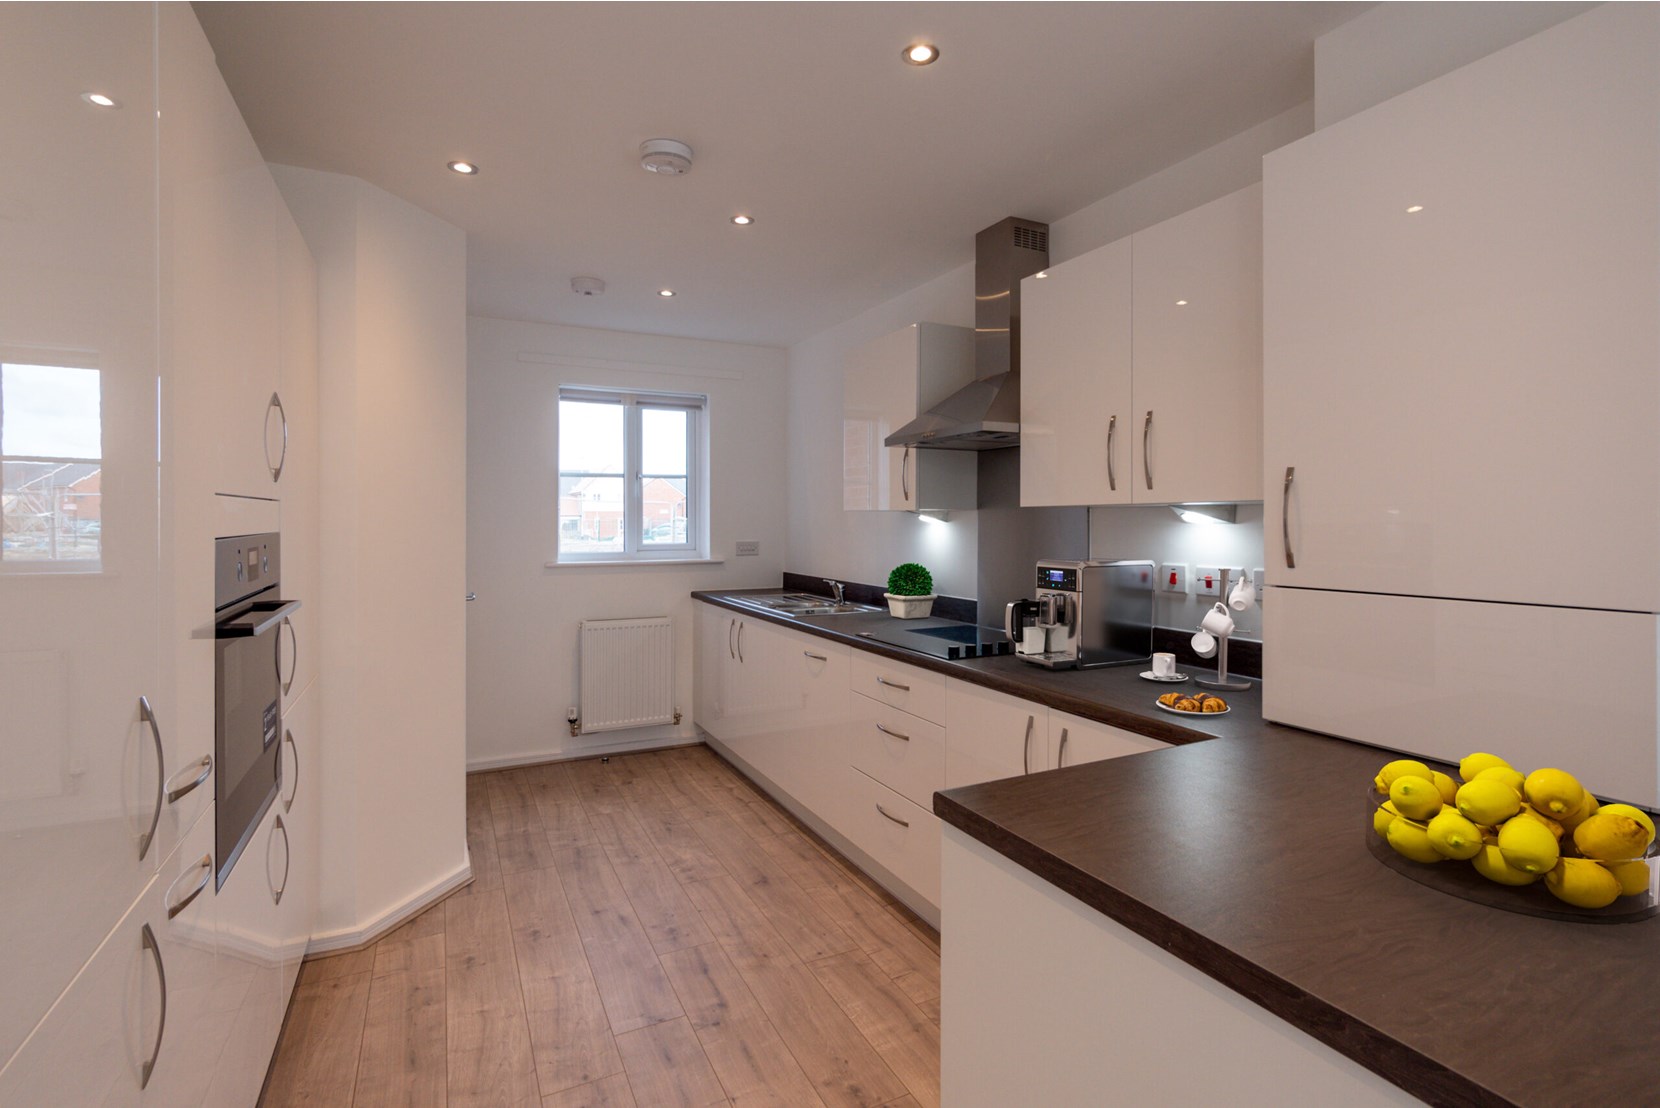 Houses by Simple Life to Rent, The New Stamford, 4 bedroom house, kitchen